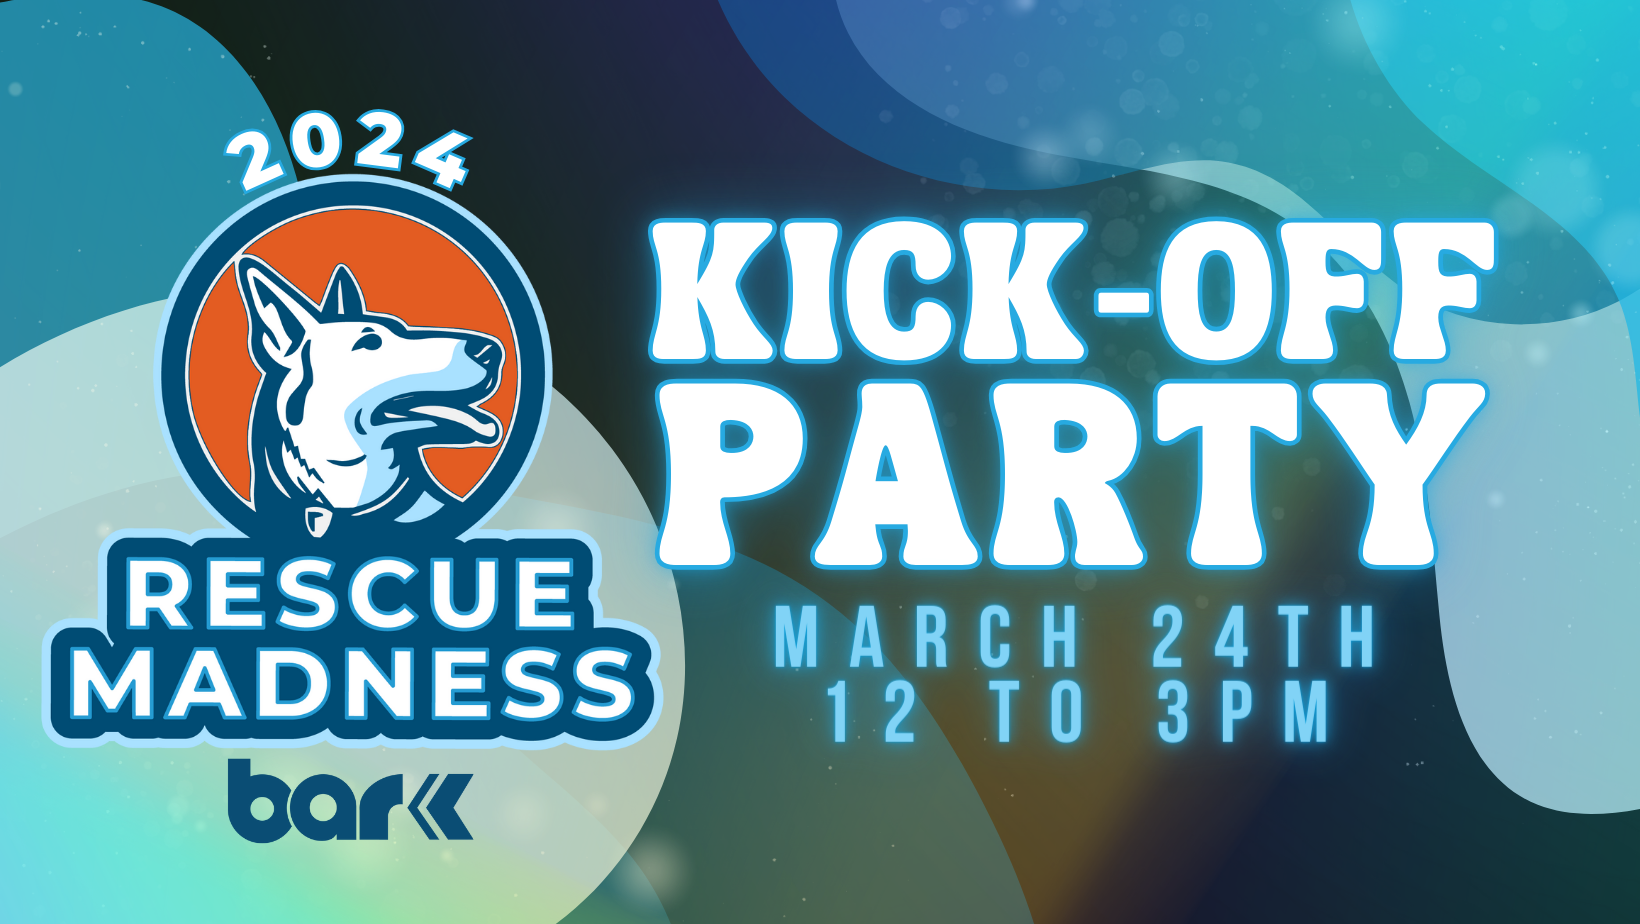 Rescue madness 2024 kick-off party on March 24th from 12 to 3 pm.